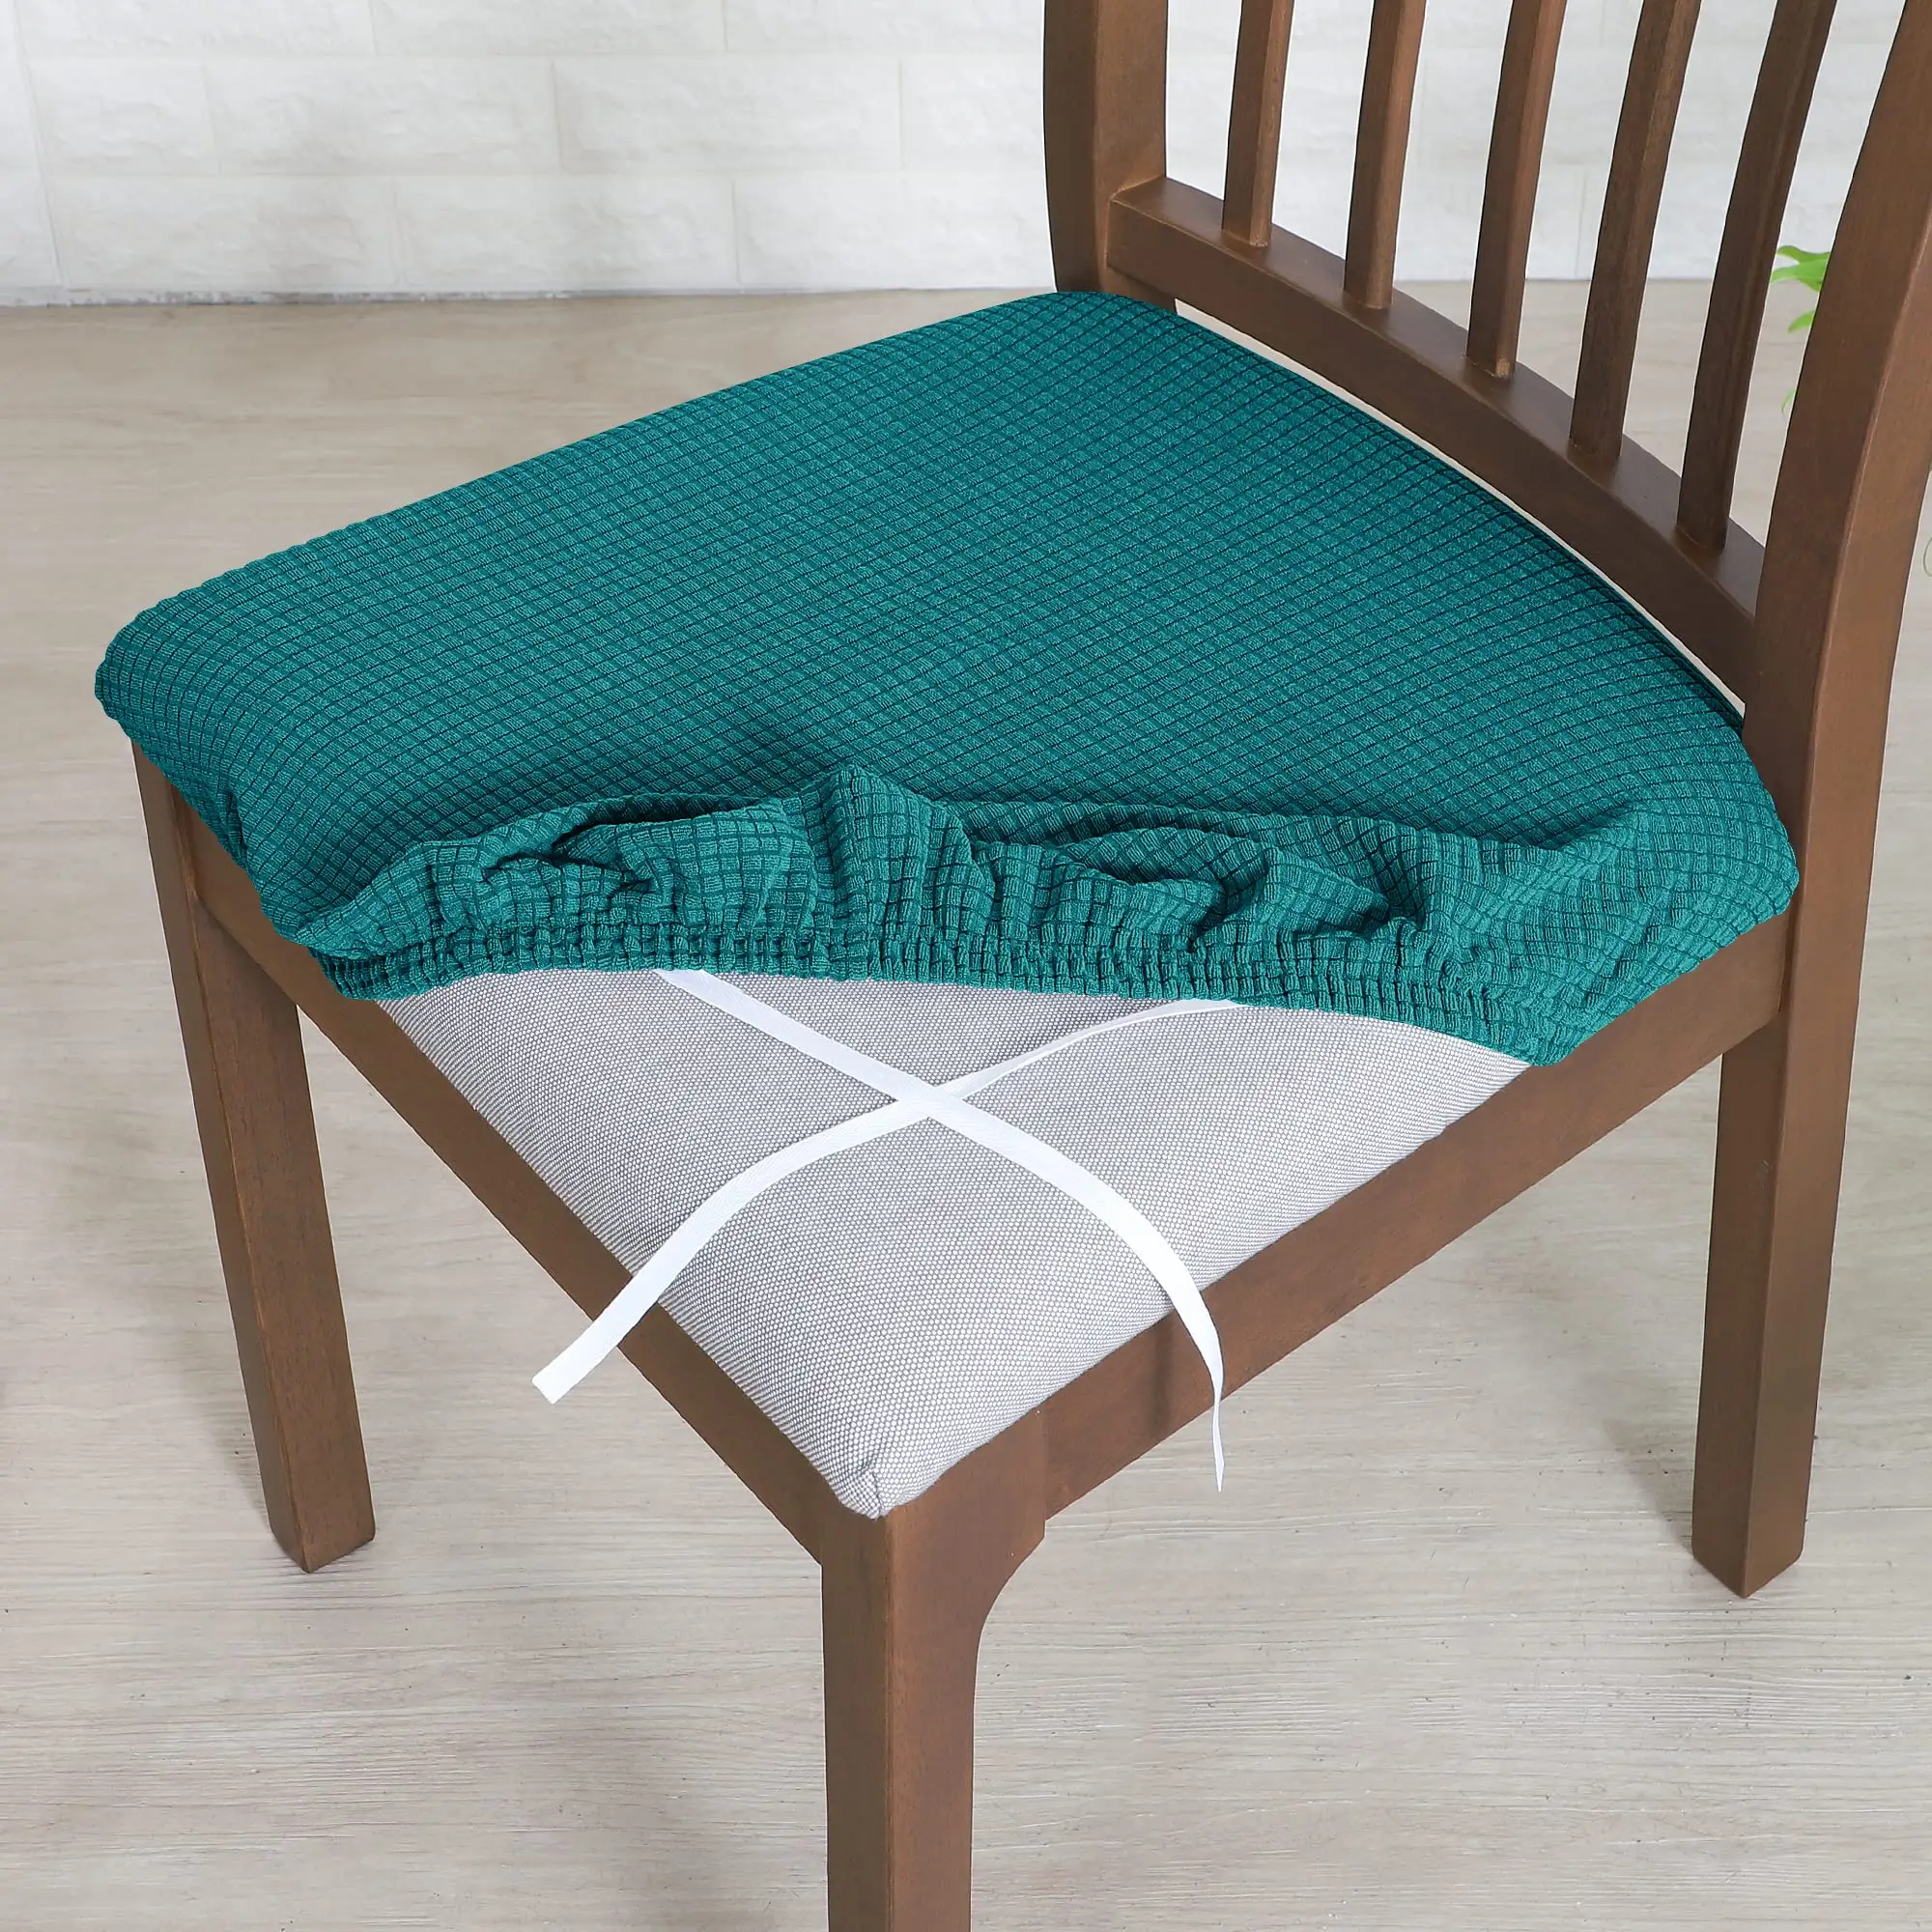 FORCHEER Chair Seat Cover for Dinning Room Jacquard Water Resistant Stretch Seat Cover for Chairs Washable, Teal